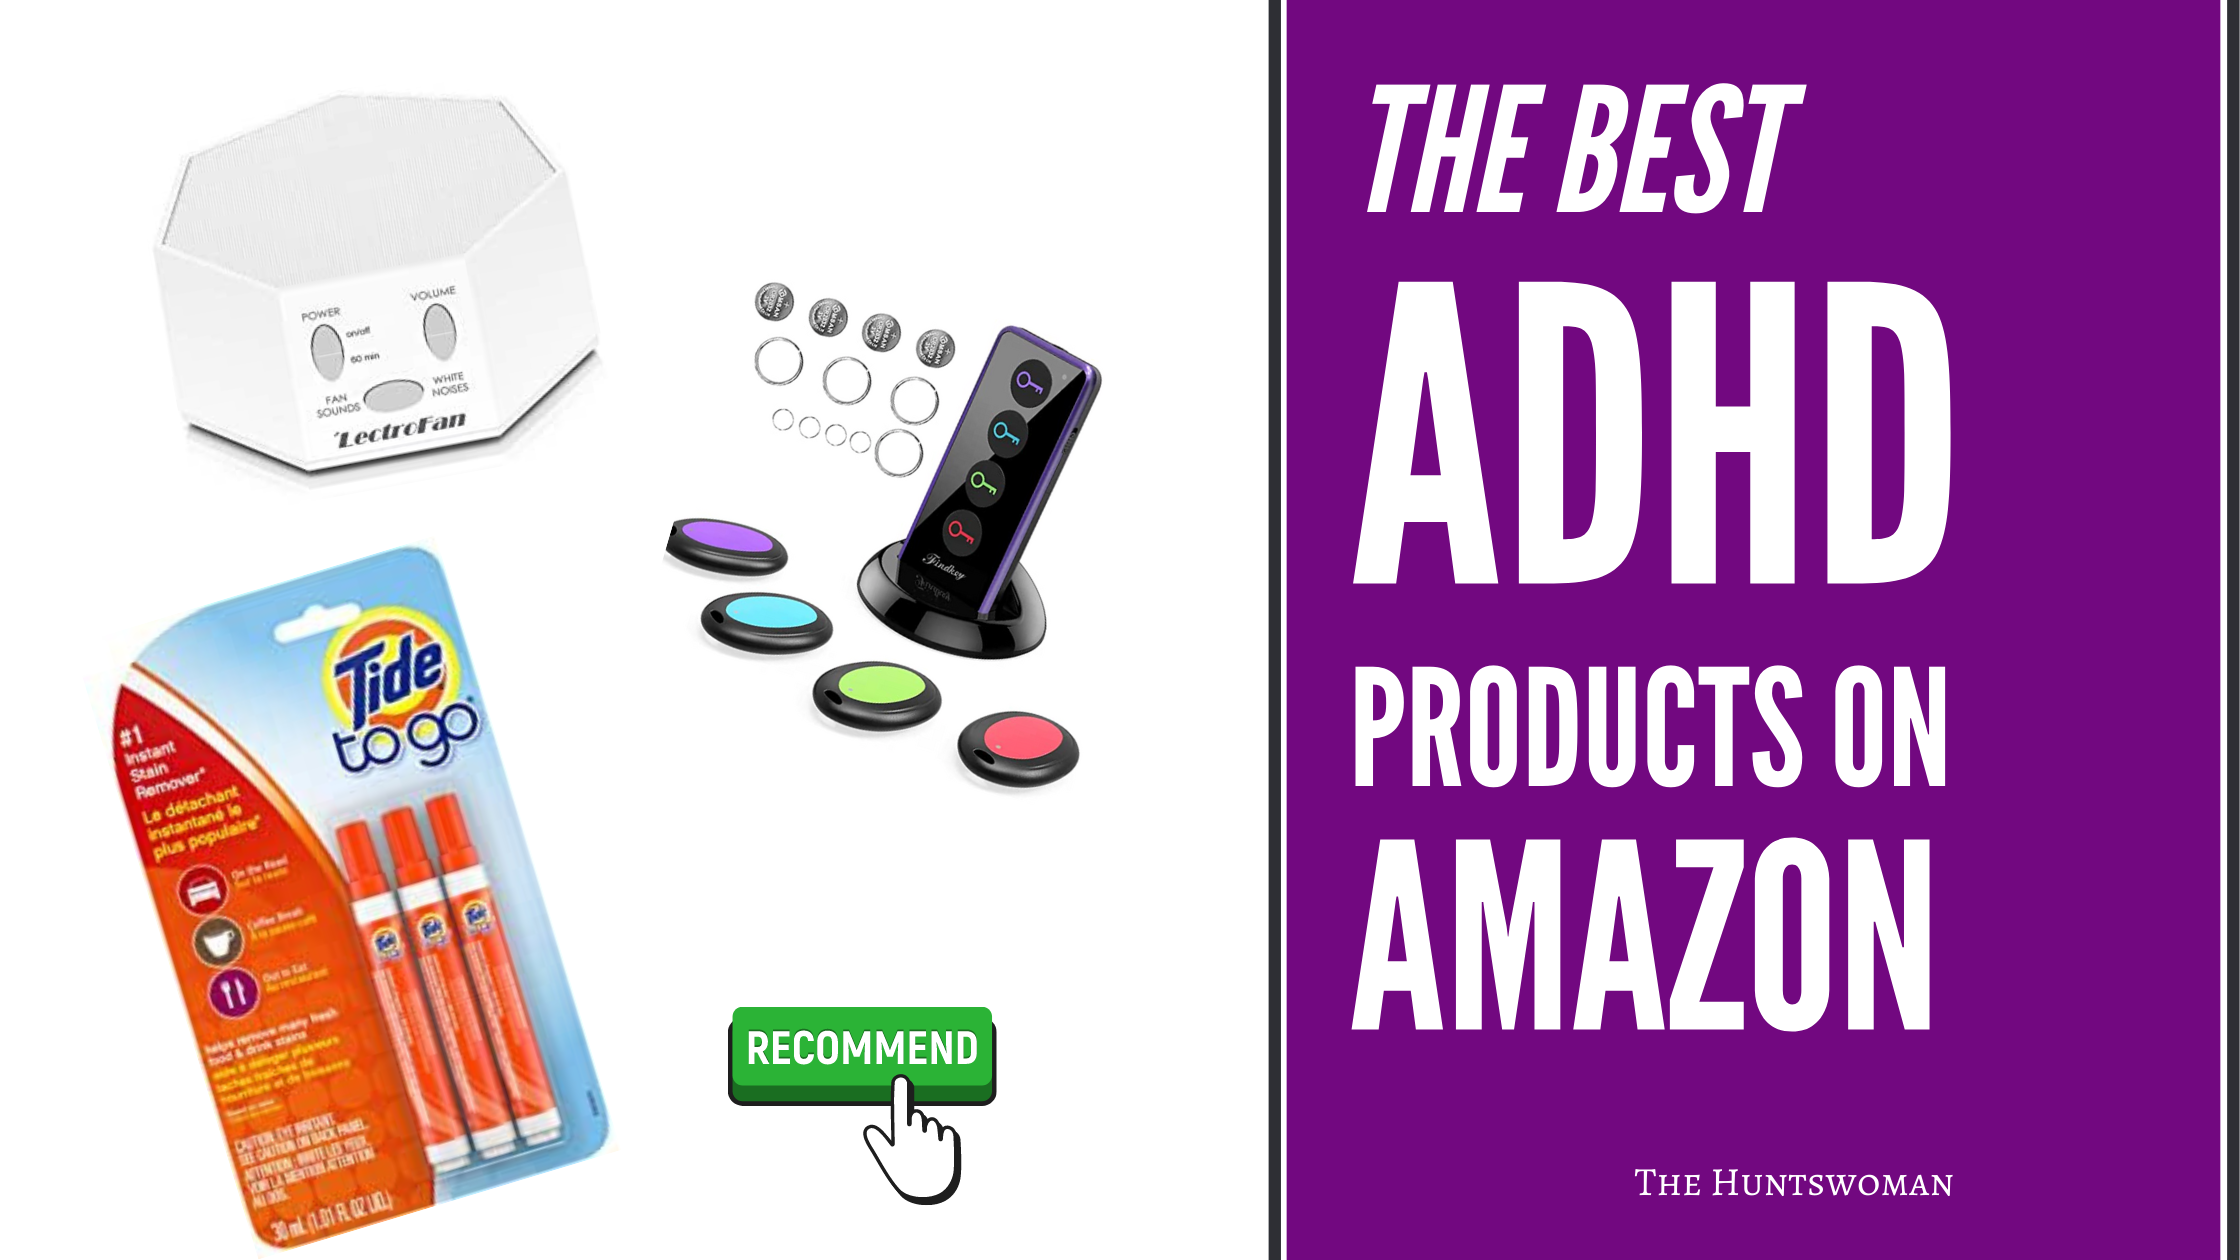 https://thehuntswoman.com/wp-content/uploads/2021/06/adhd-products-on-amazon-to-get.png